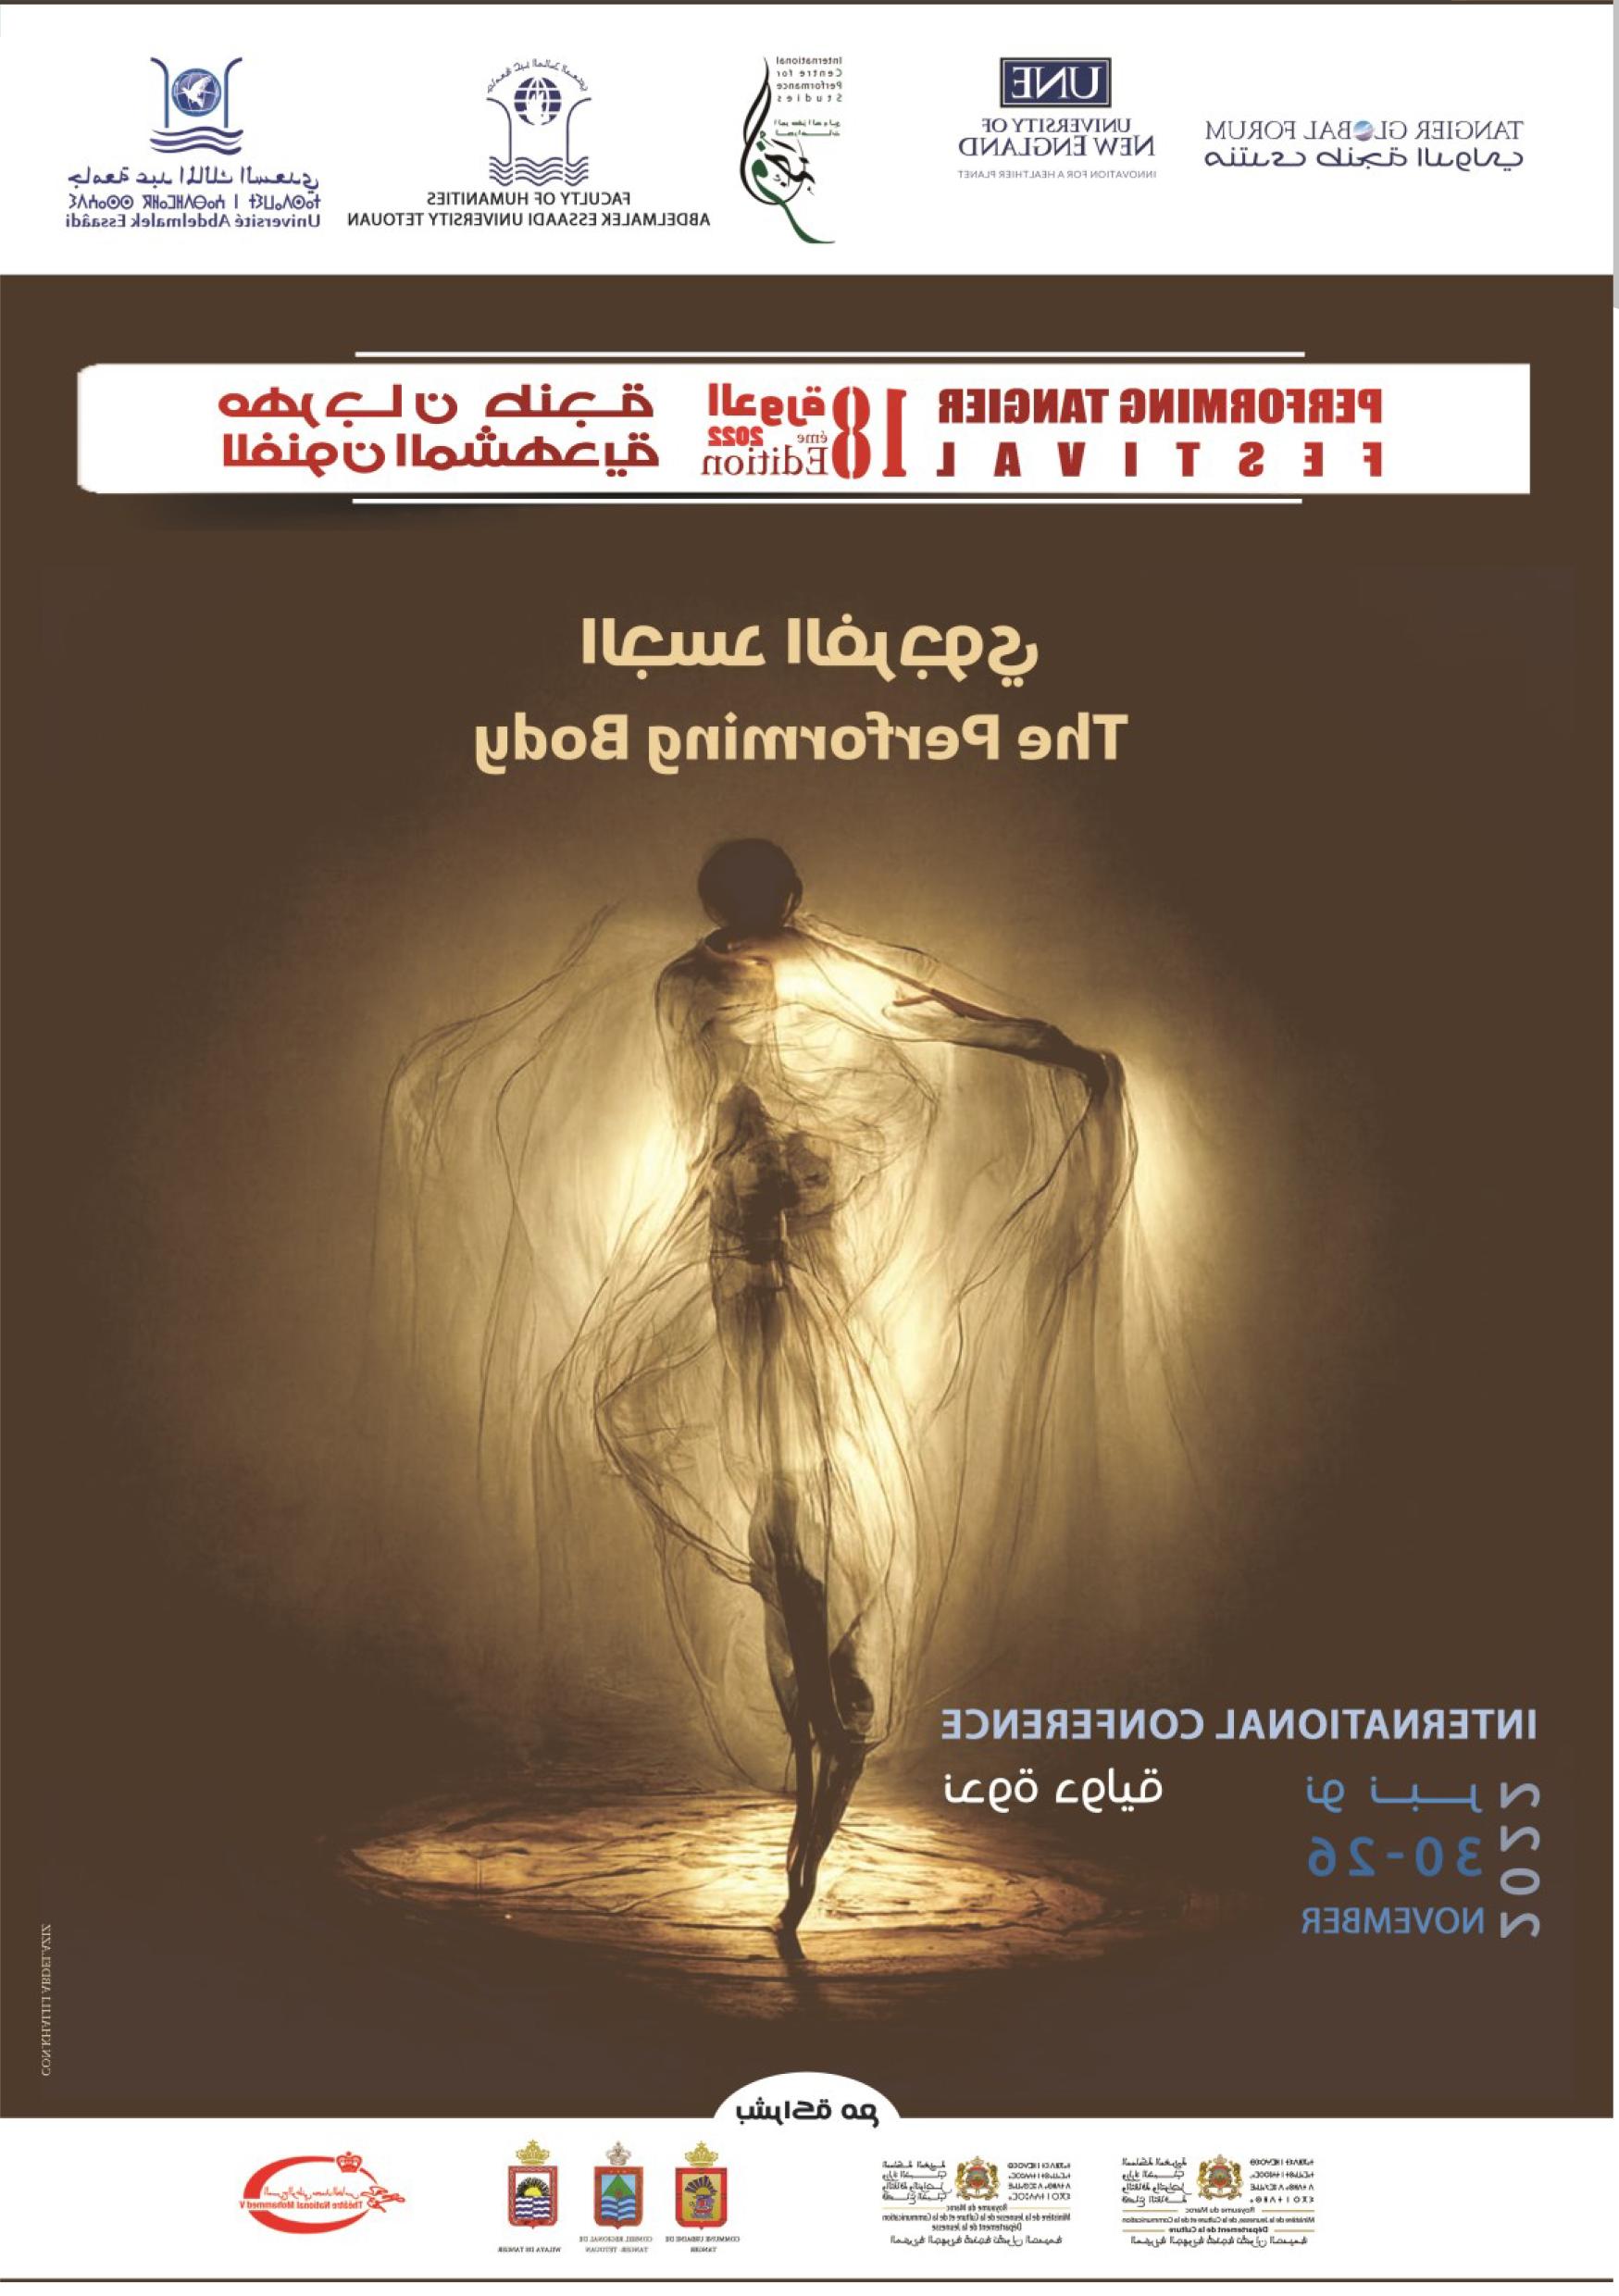 18th Annual Performing Tangier: The Performing Body